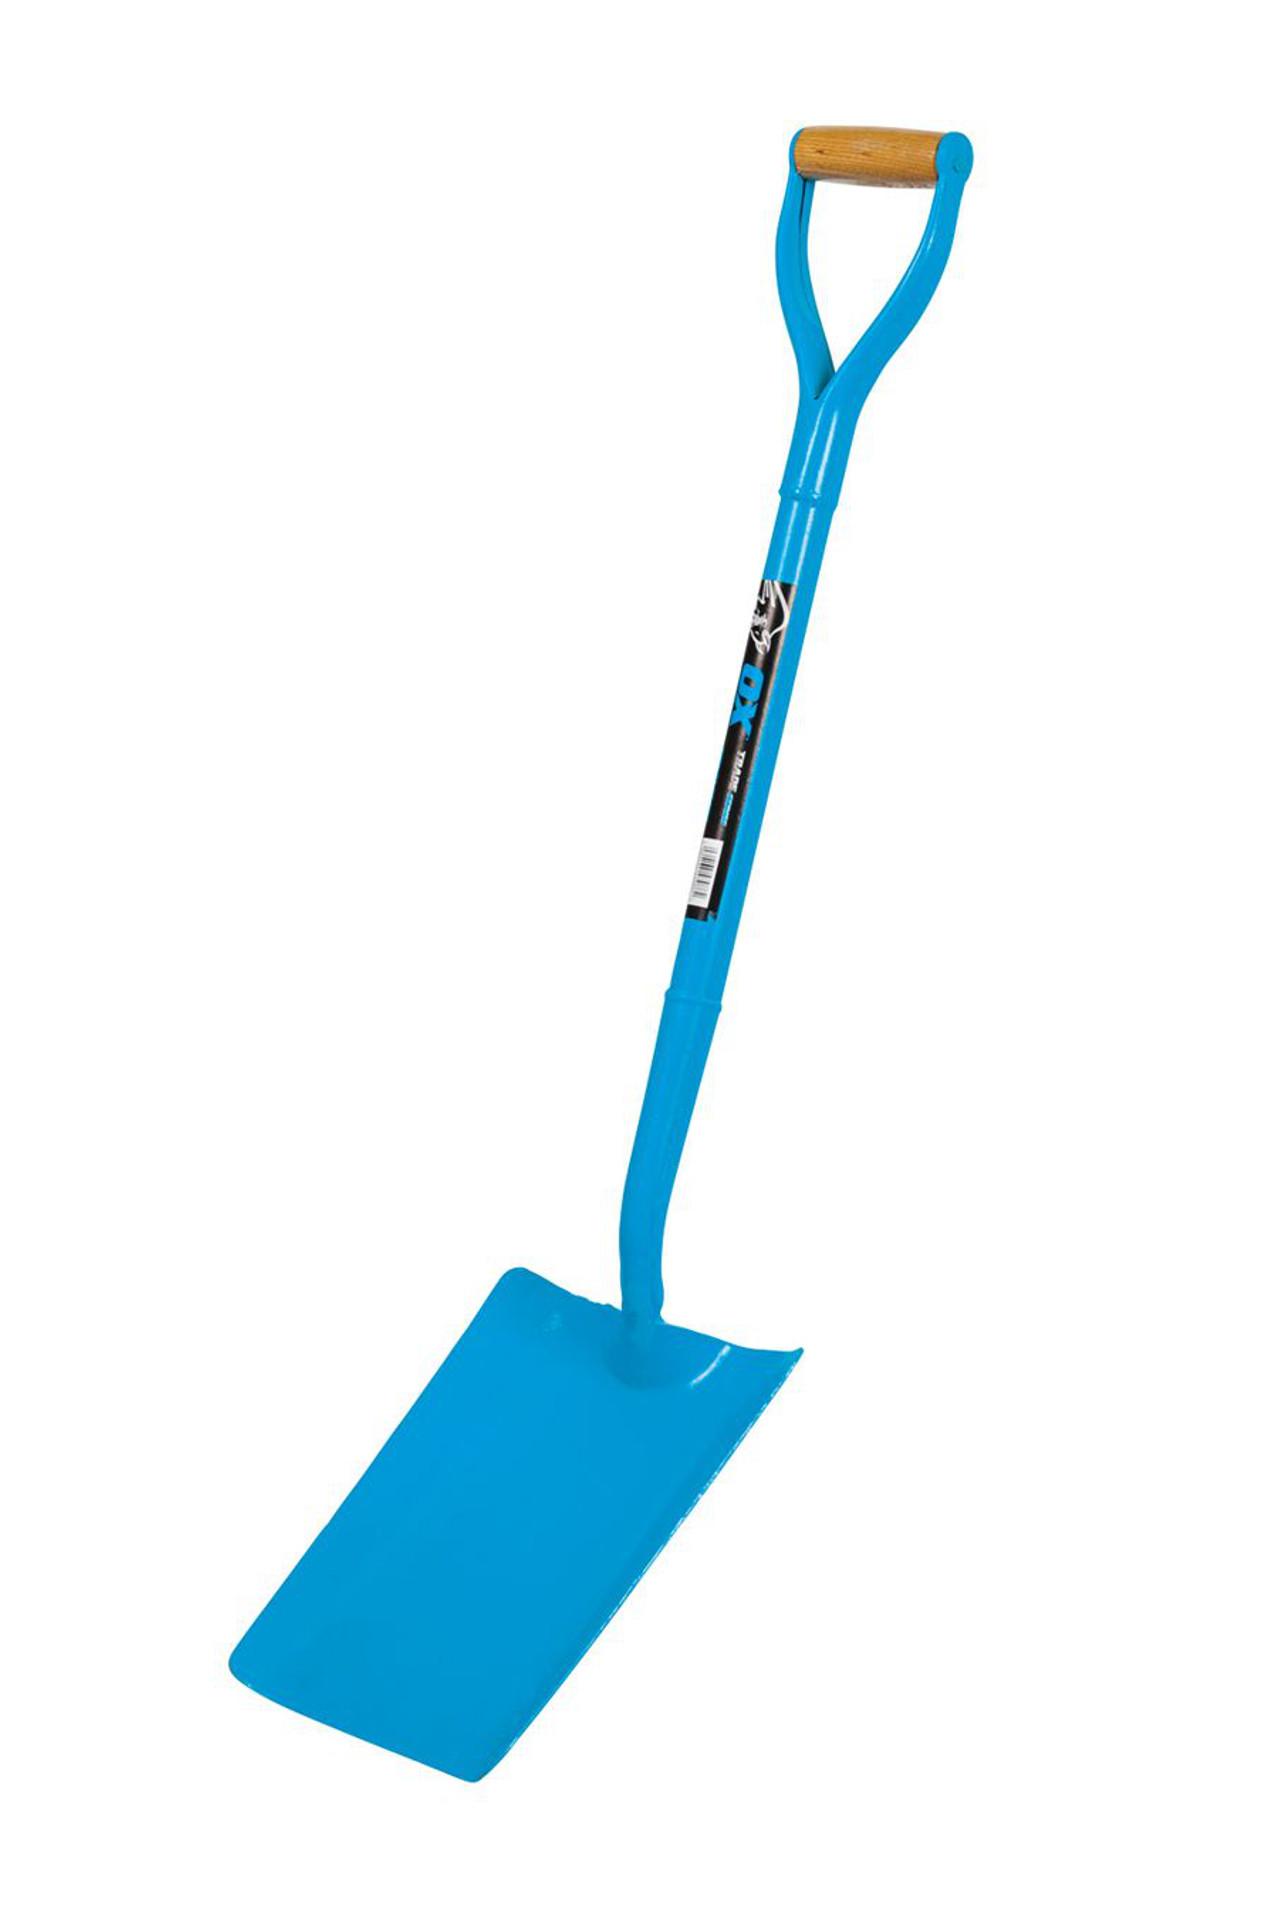 Ox Solid ForgedTaper Mouth Trade Shovel